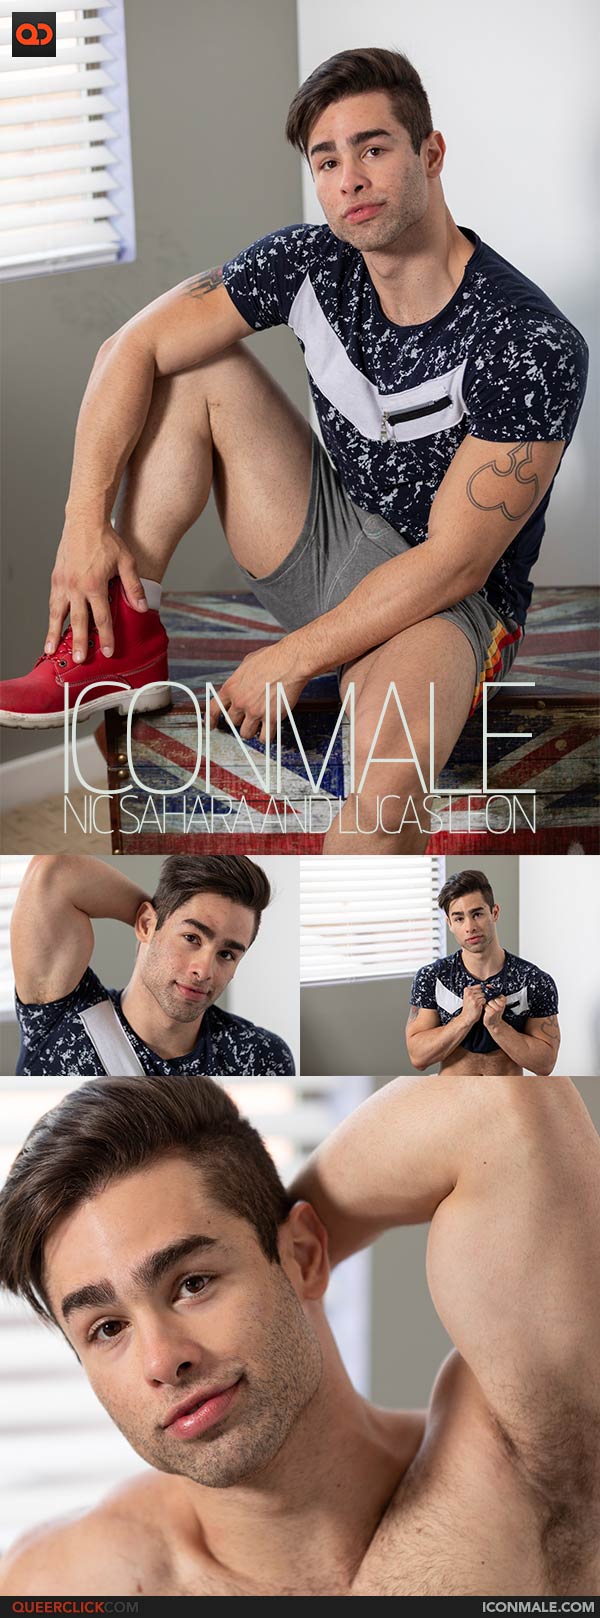 IconMale: Nic Sahara and Lucas Leon - Part 1